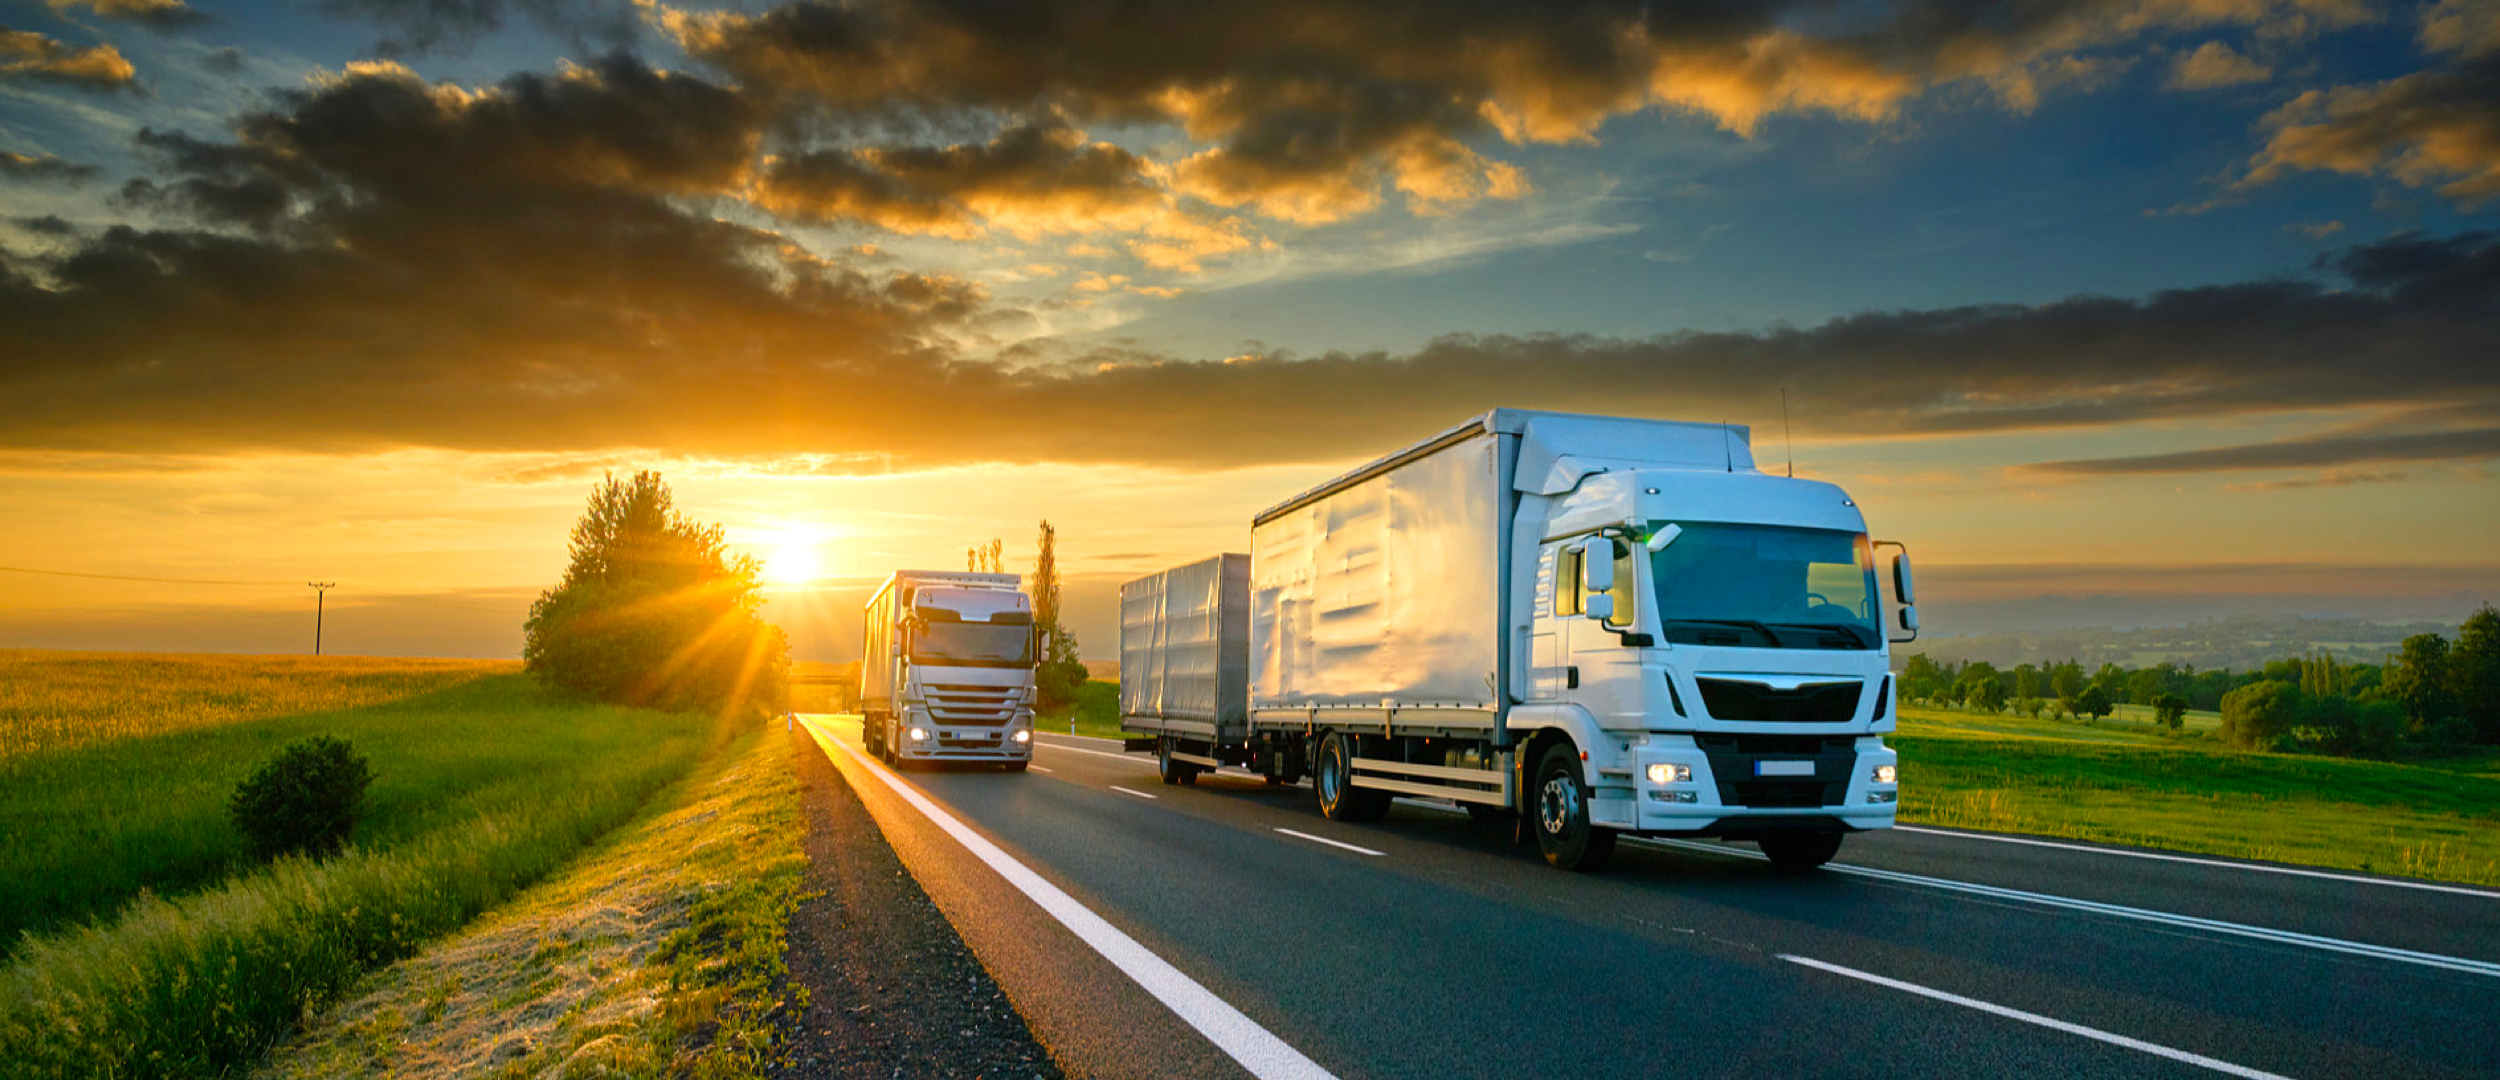 The Top 4 Things Every Logistics Land Transport Company Needs - Logistics Asia